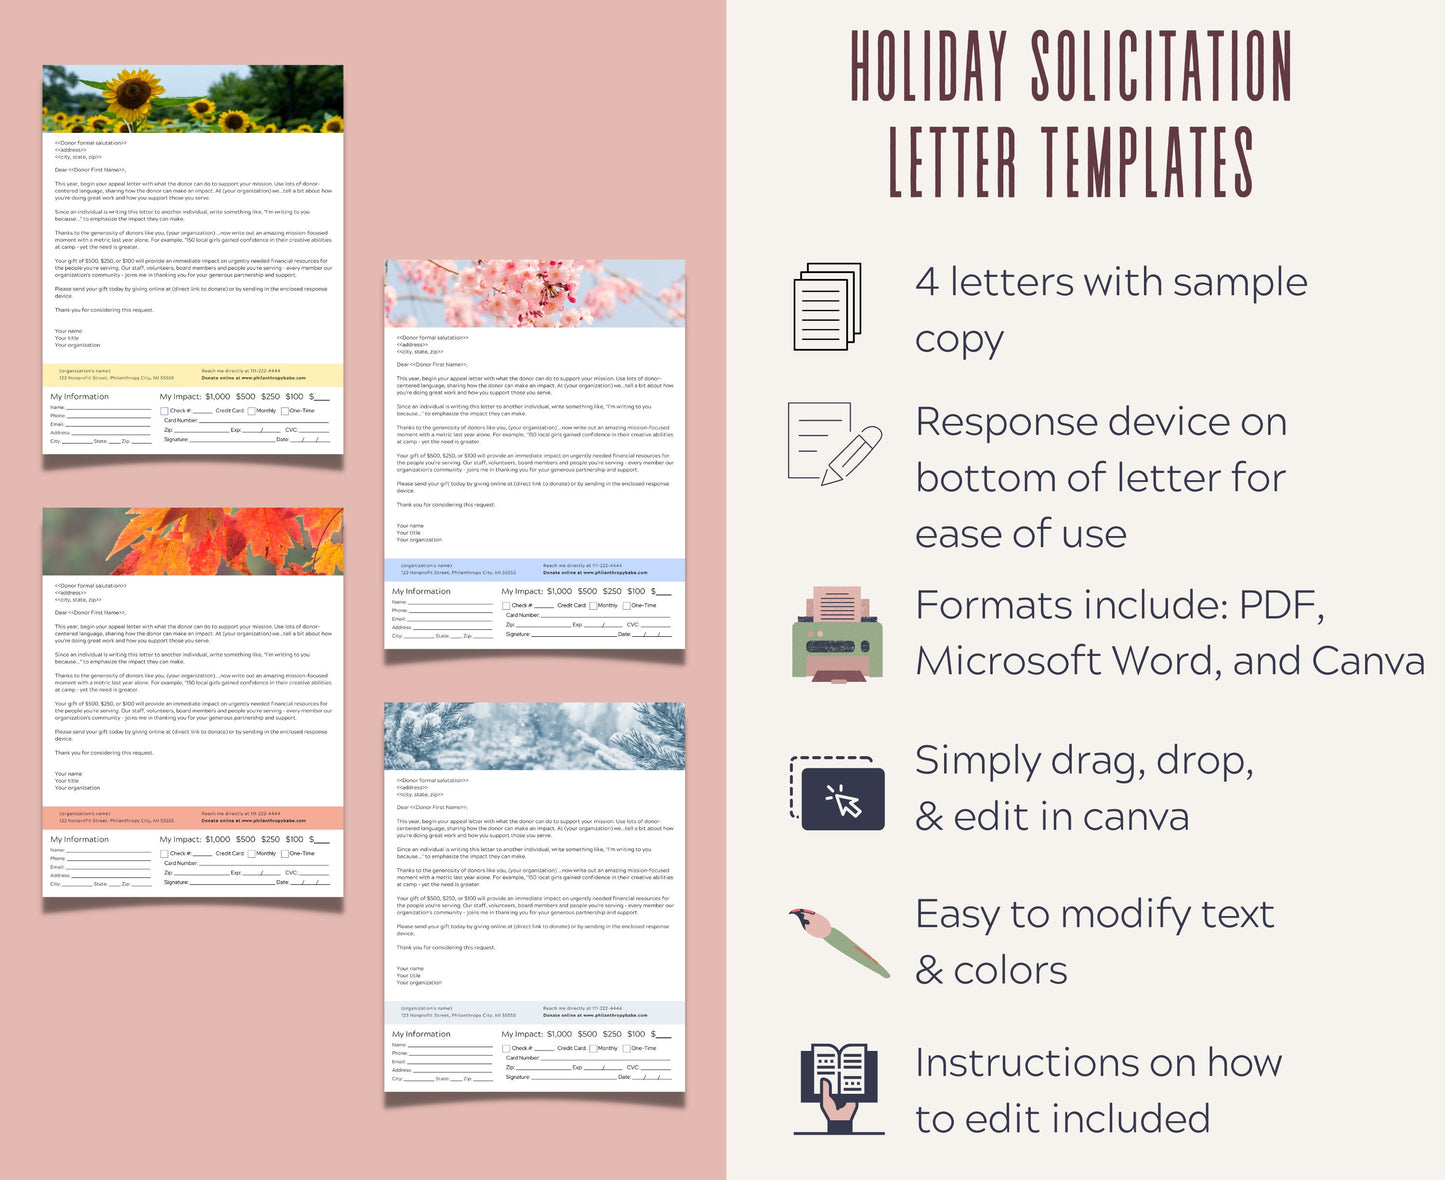 Holiday Solicitation Letter Templates